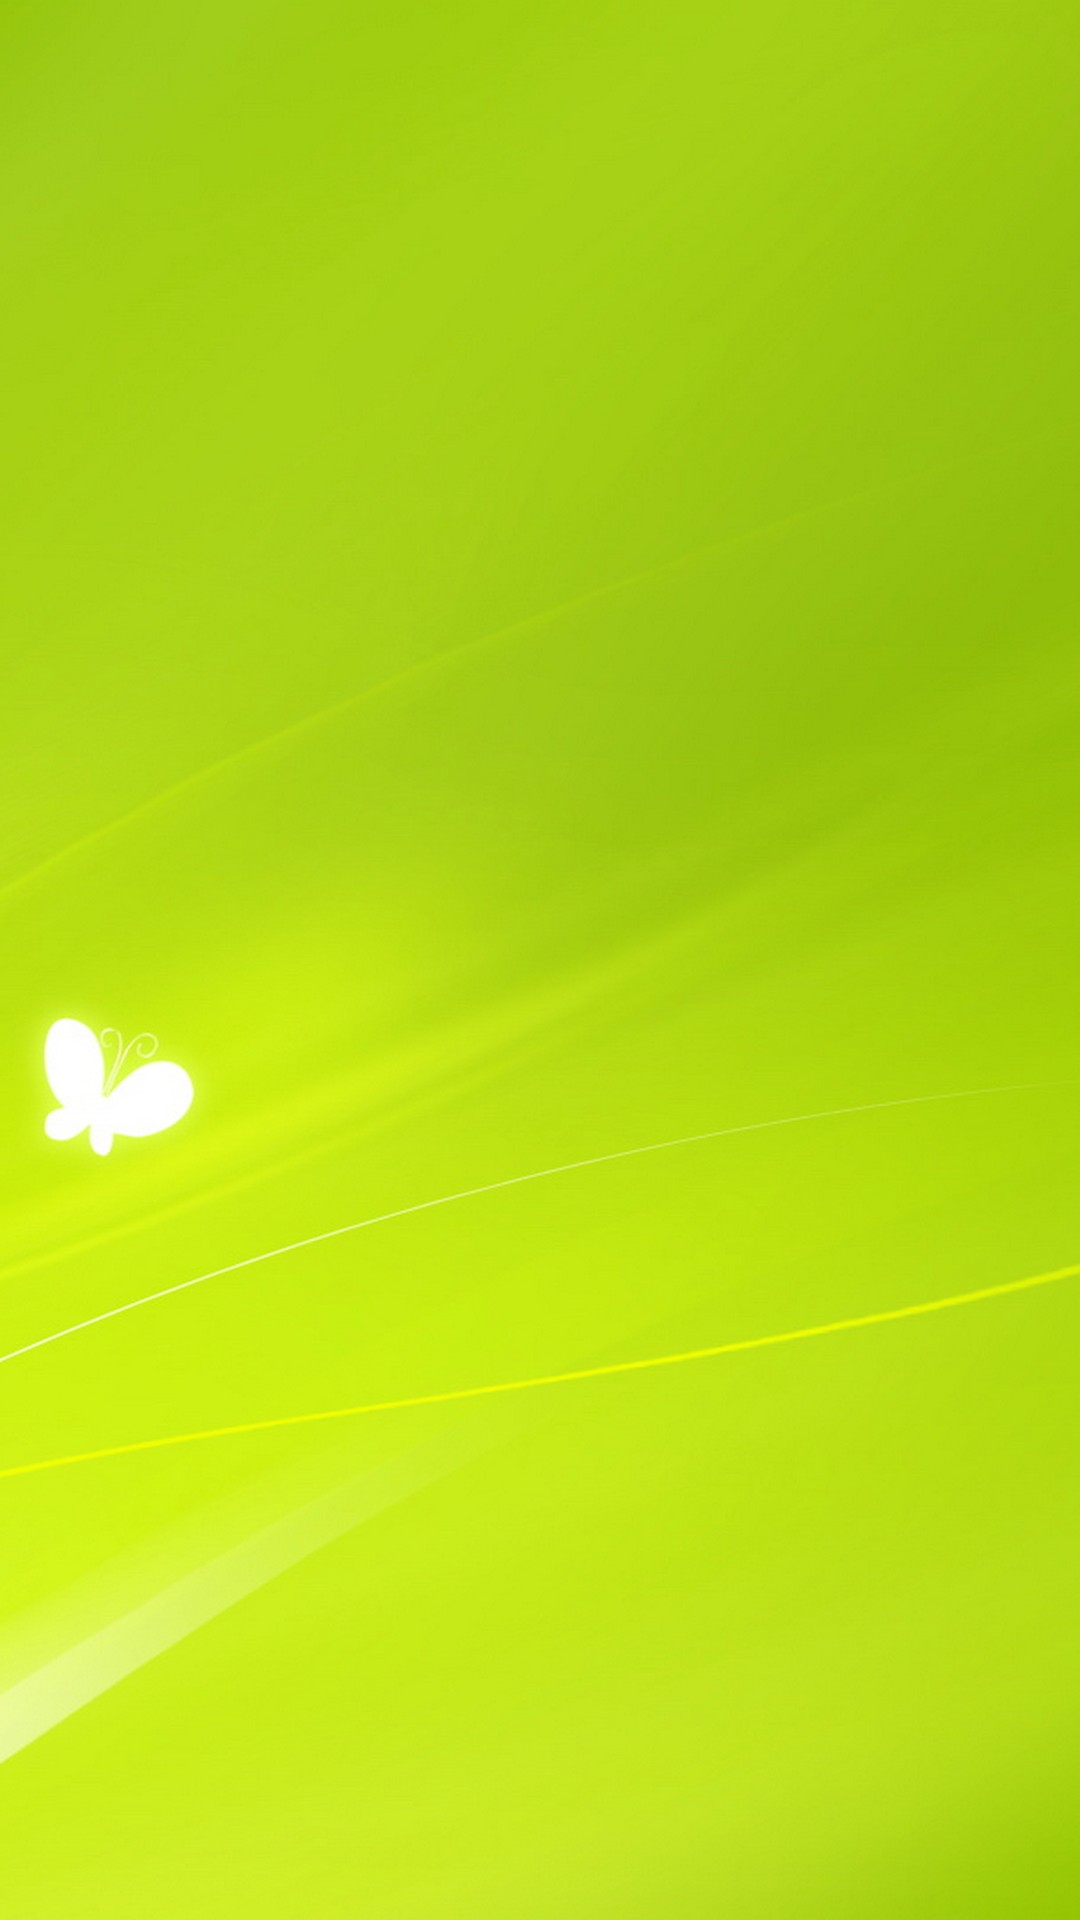 Wallpaper Android Lime Green With Image Resolution - Macro Photography - HD Wallpaper 